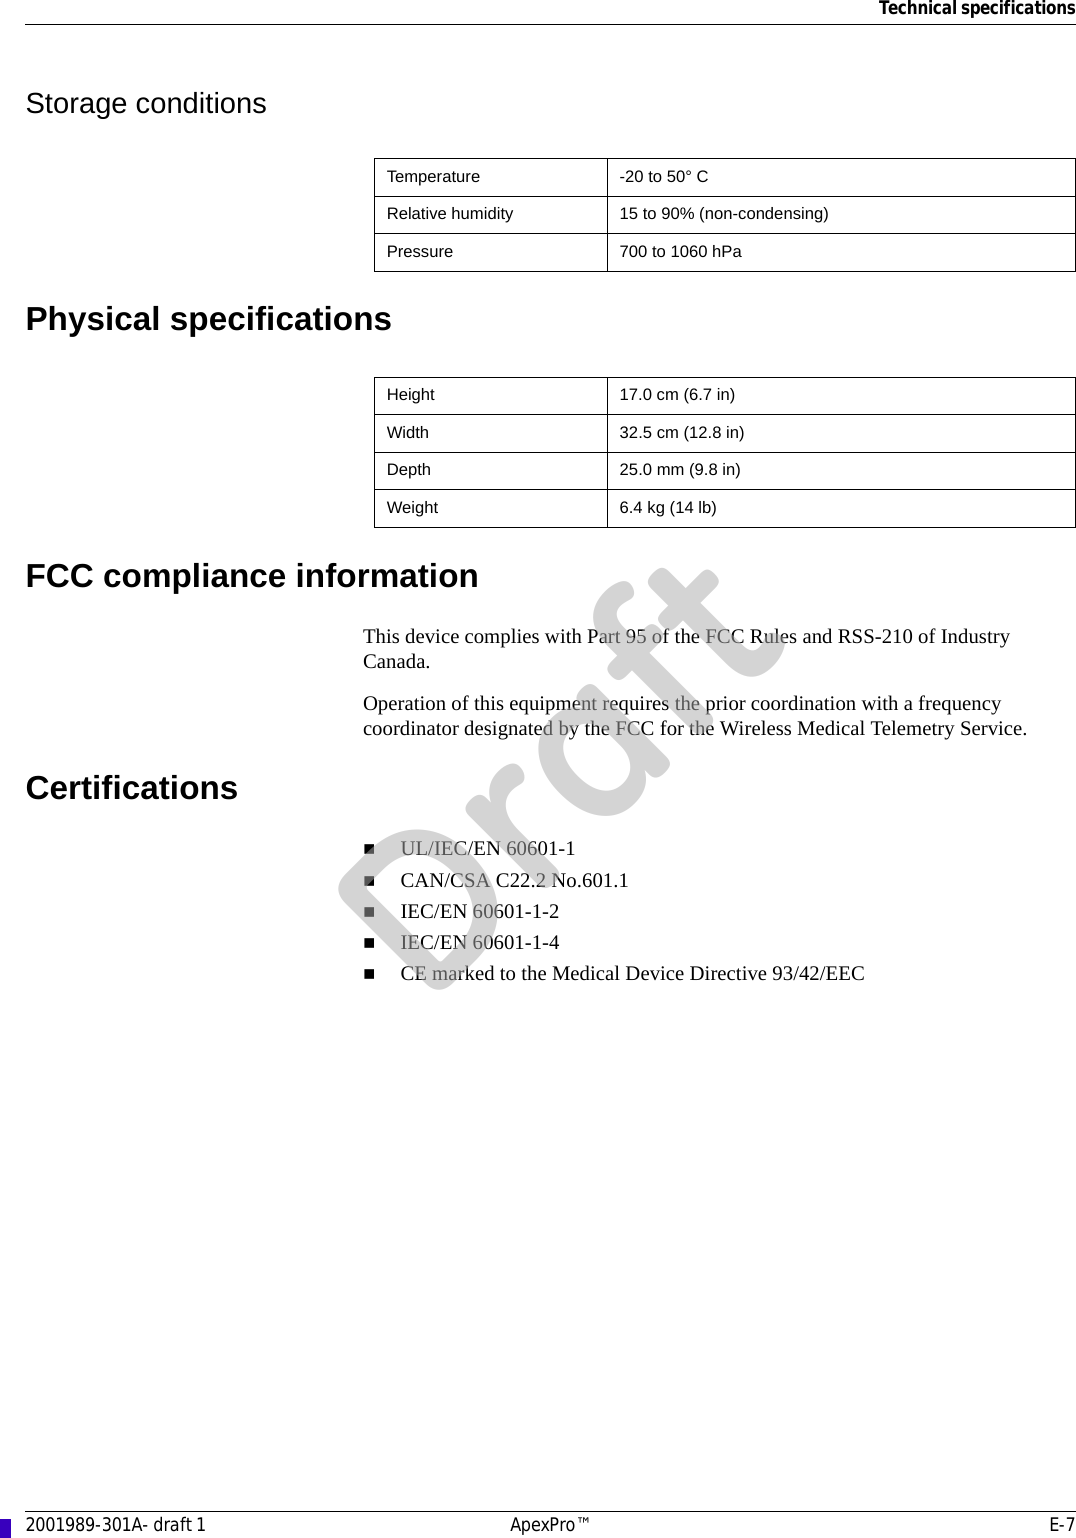 Technical specifications2001989-301A- draft 1 ApexPro™ E-7Storage conditionsPhysical specificationsFCC compliance informationThis device complies with Part 95 of the FCC Rules and RSS-210 of Industry Canada. Operation of this equipment requires the prior coordination with a frequency coordinator designated by the FCC for the Wireless Medical Telemetry Service. CertificationsUL/IEC/EN 60601-1CAN/CSA C22.2 No.601.1IEC/EN 60601-1-2IEC/EN 60601-1-4CE marked to the Medical Device Directive 93/42/EECTemperature -20 to 50° CRelative humidity 15 to 90% (non-condensing)Pressure 700 to 1060 hPaHeight 17.0 cm (6.7 in)Width 32.5 cm (12.8 in)Depth 25.0 mm (9.8 in)Weight 6.4 kg (14 lb)Draft